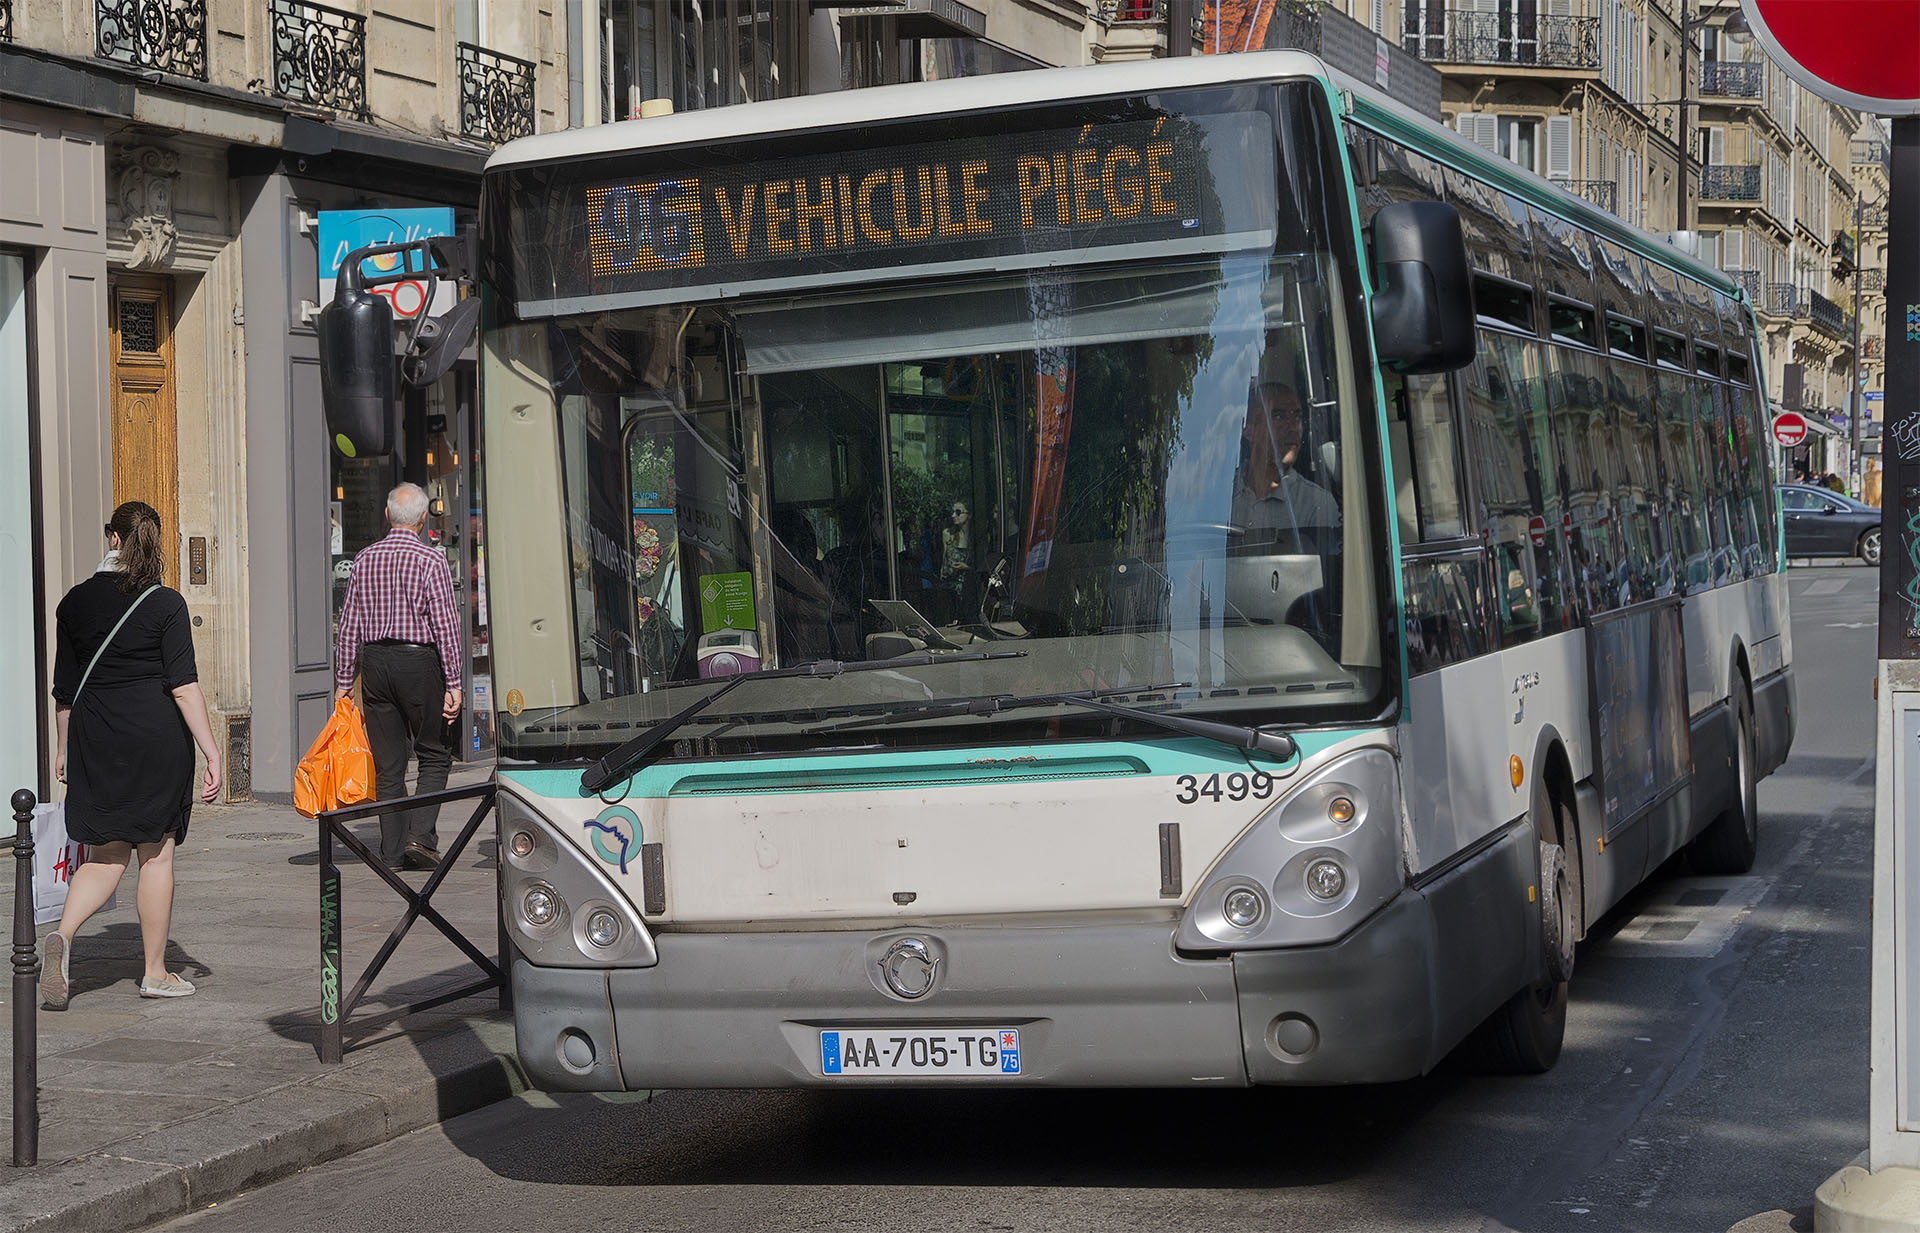 A boobytrapped RATP bus in Paris.